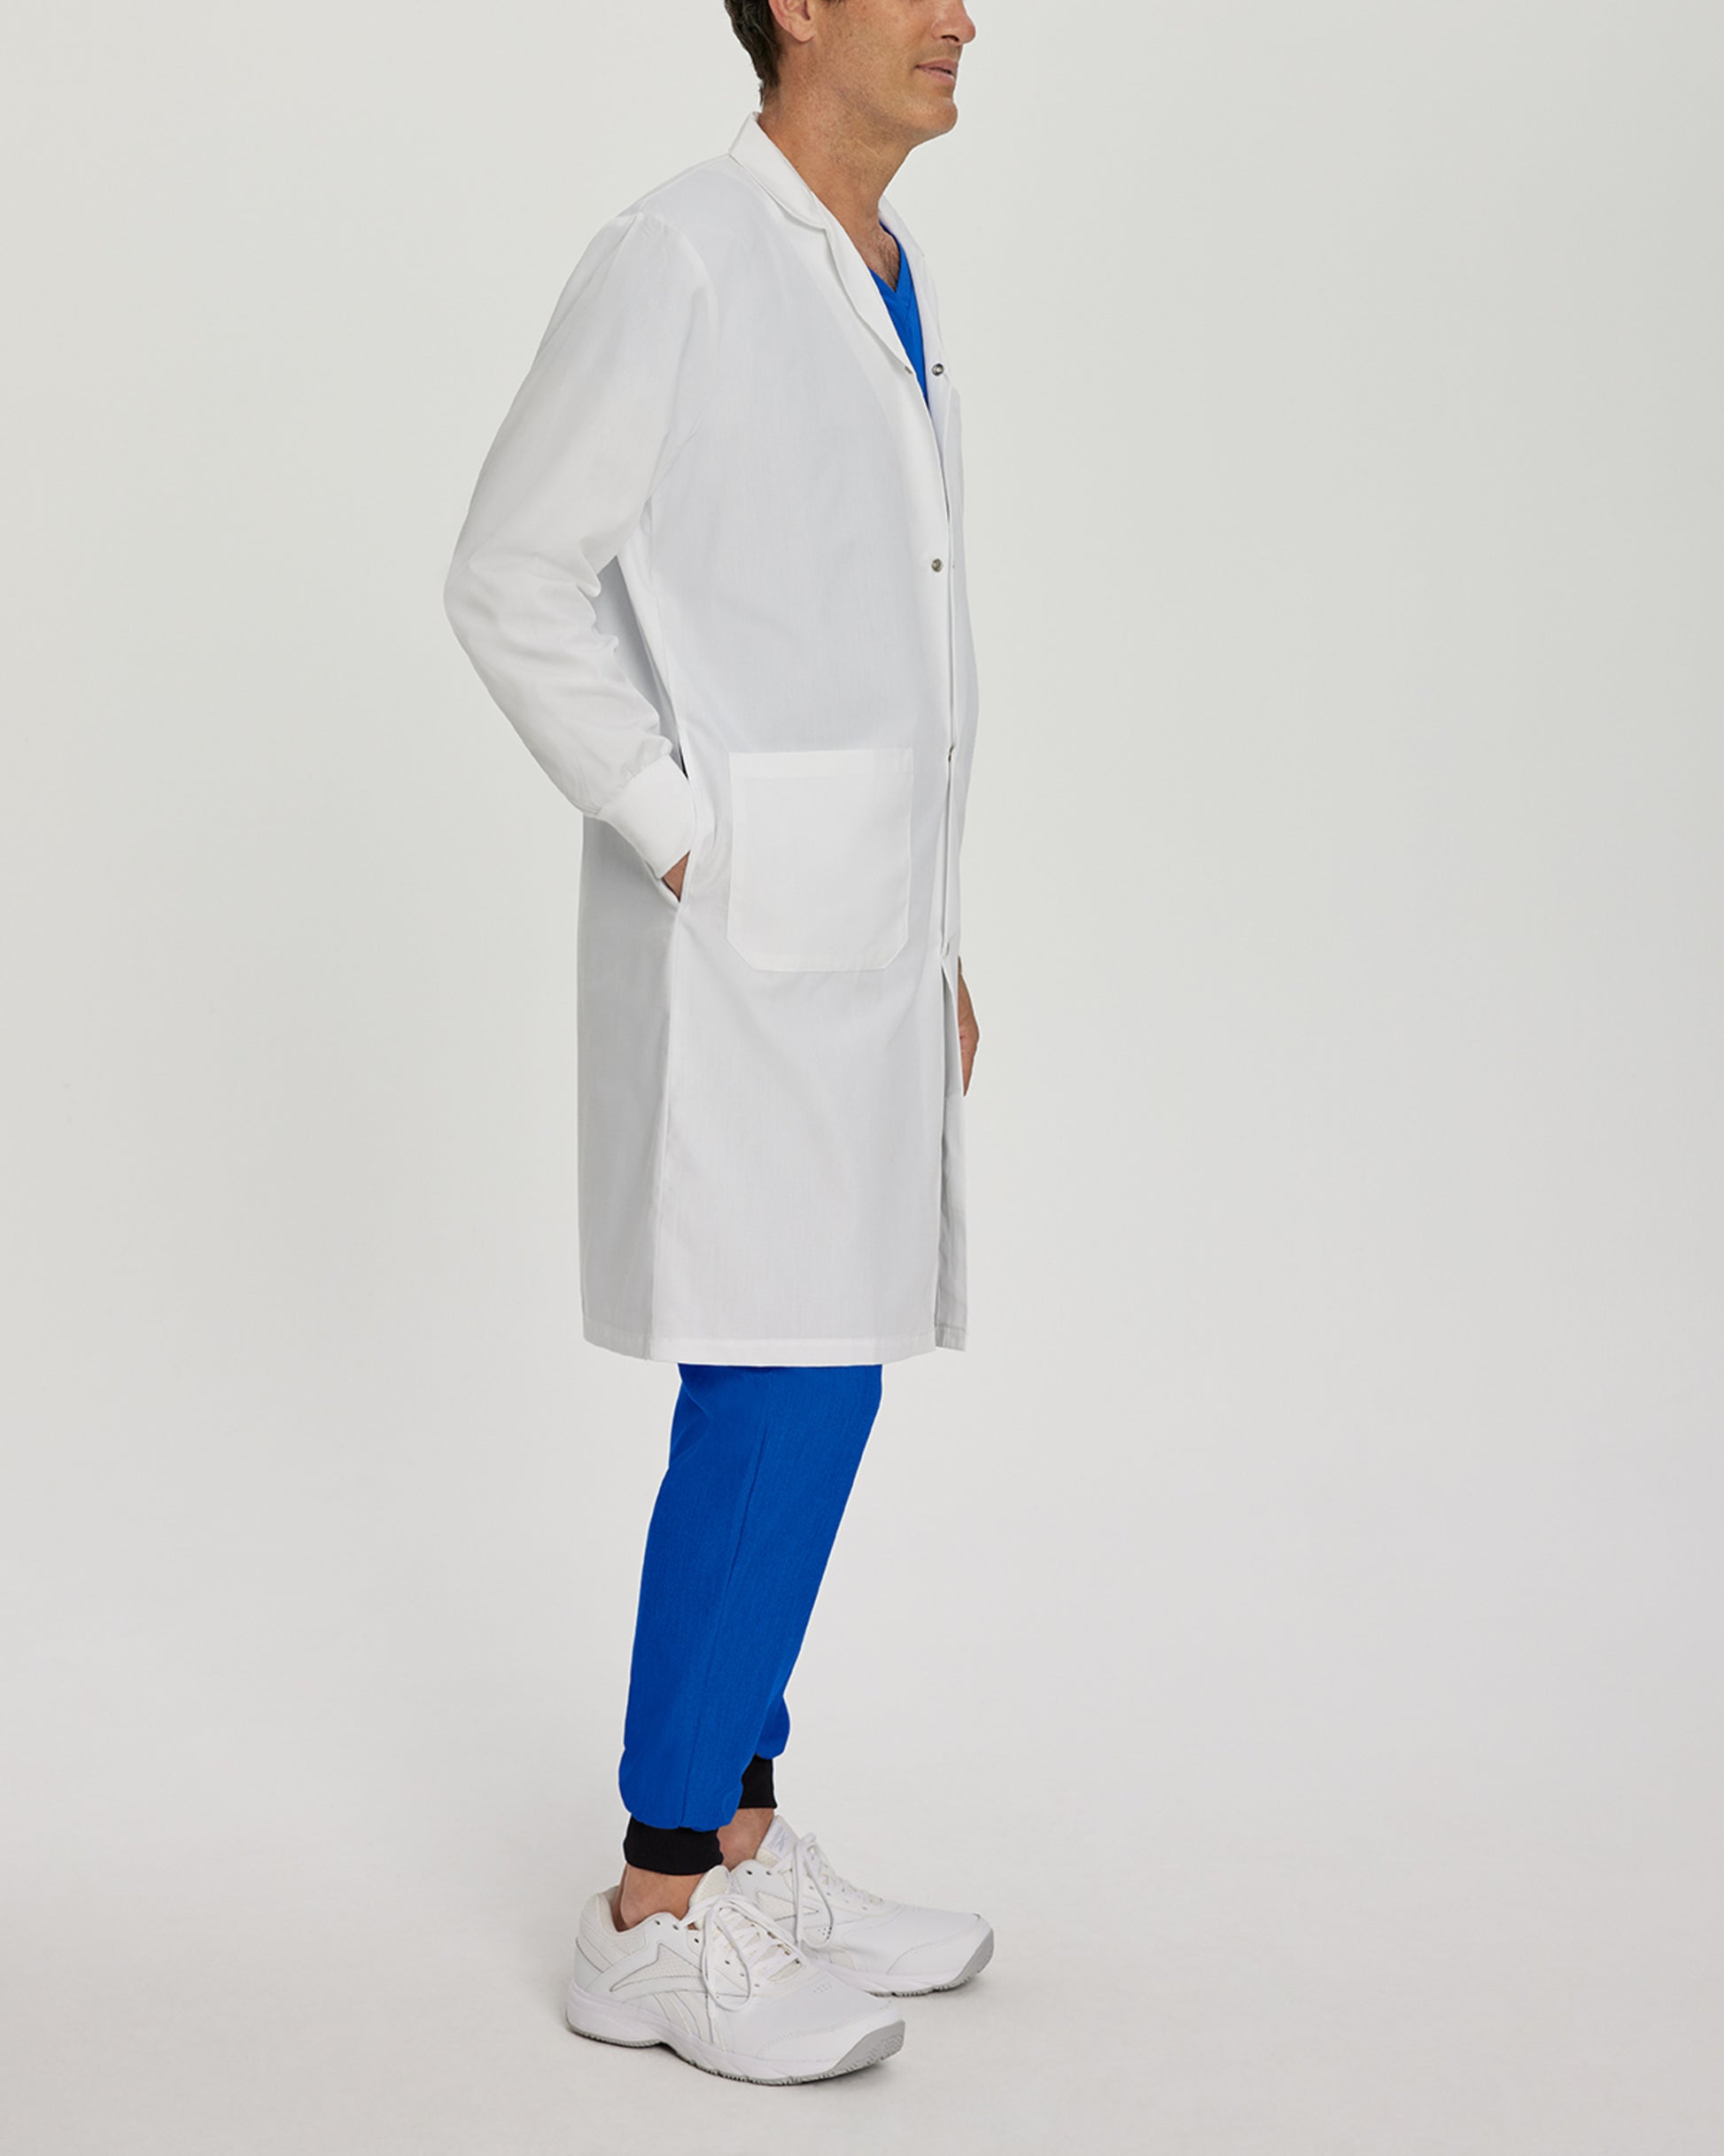 2268SR Unisex Lab coat with Rib Cuff and Snap Closure Buttons